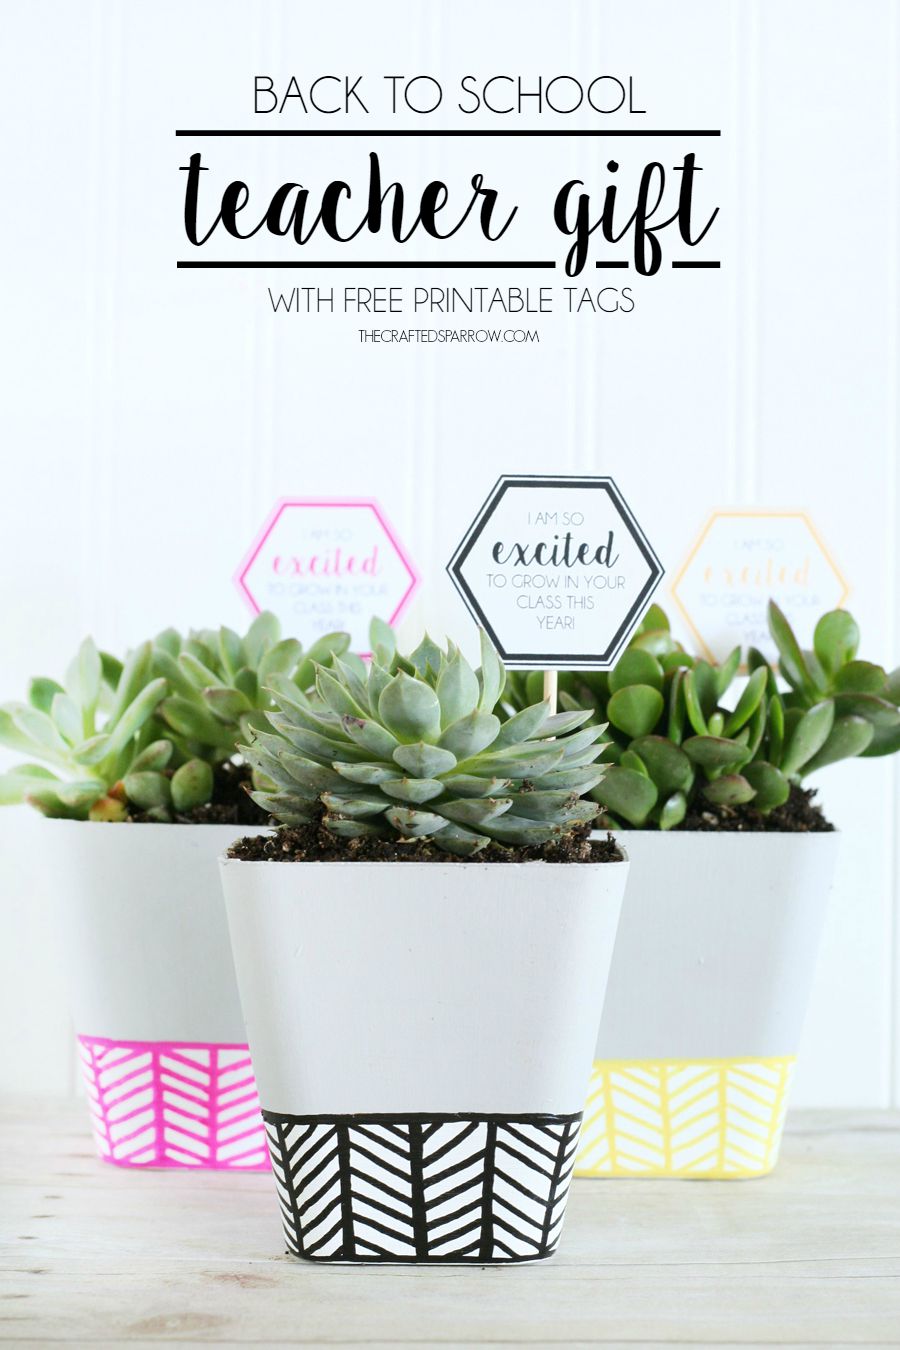 FREE back to school printables featured by US life and style blogger, By Jen Rose